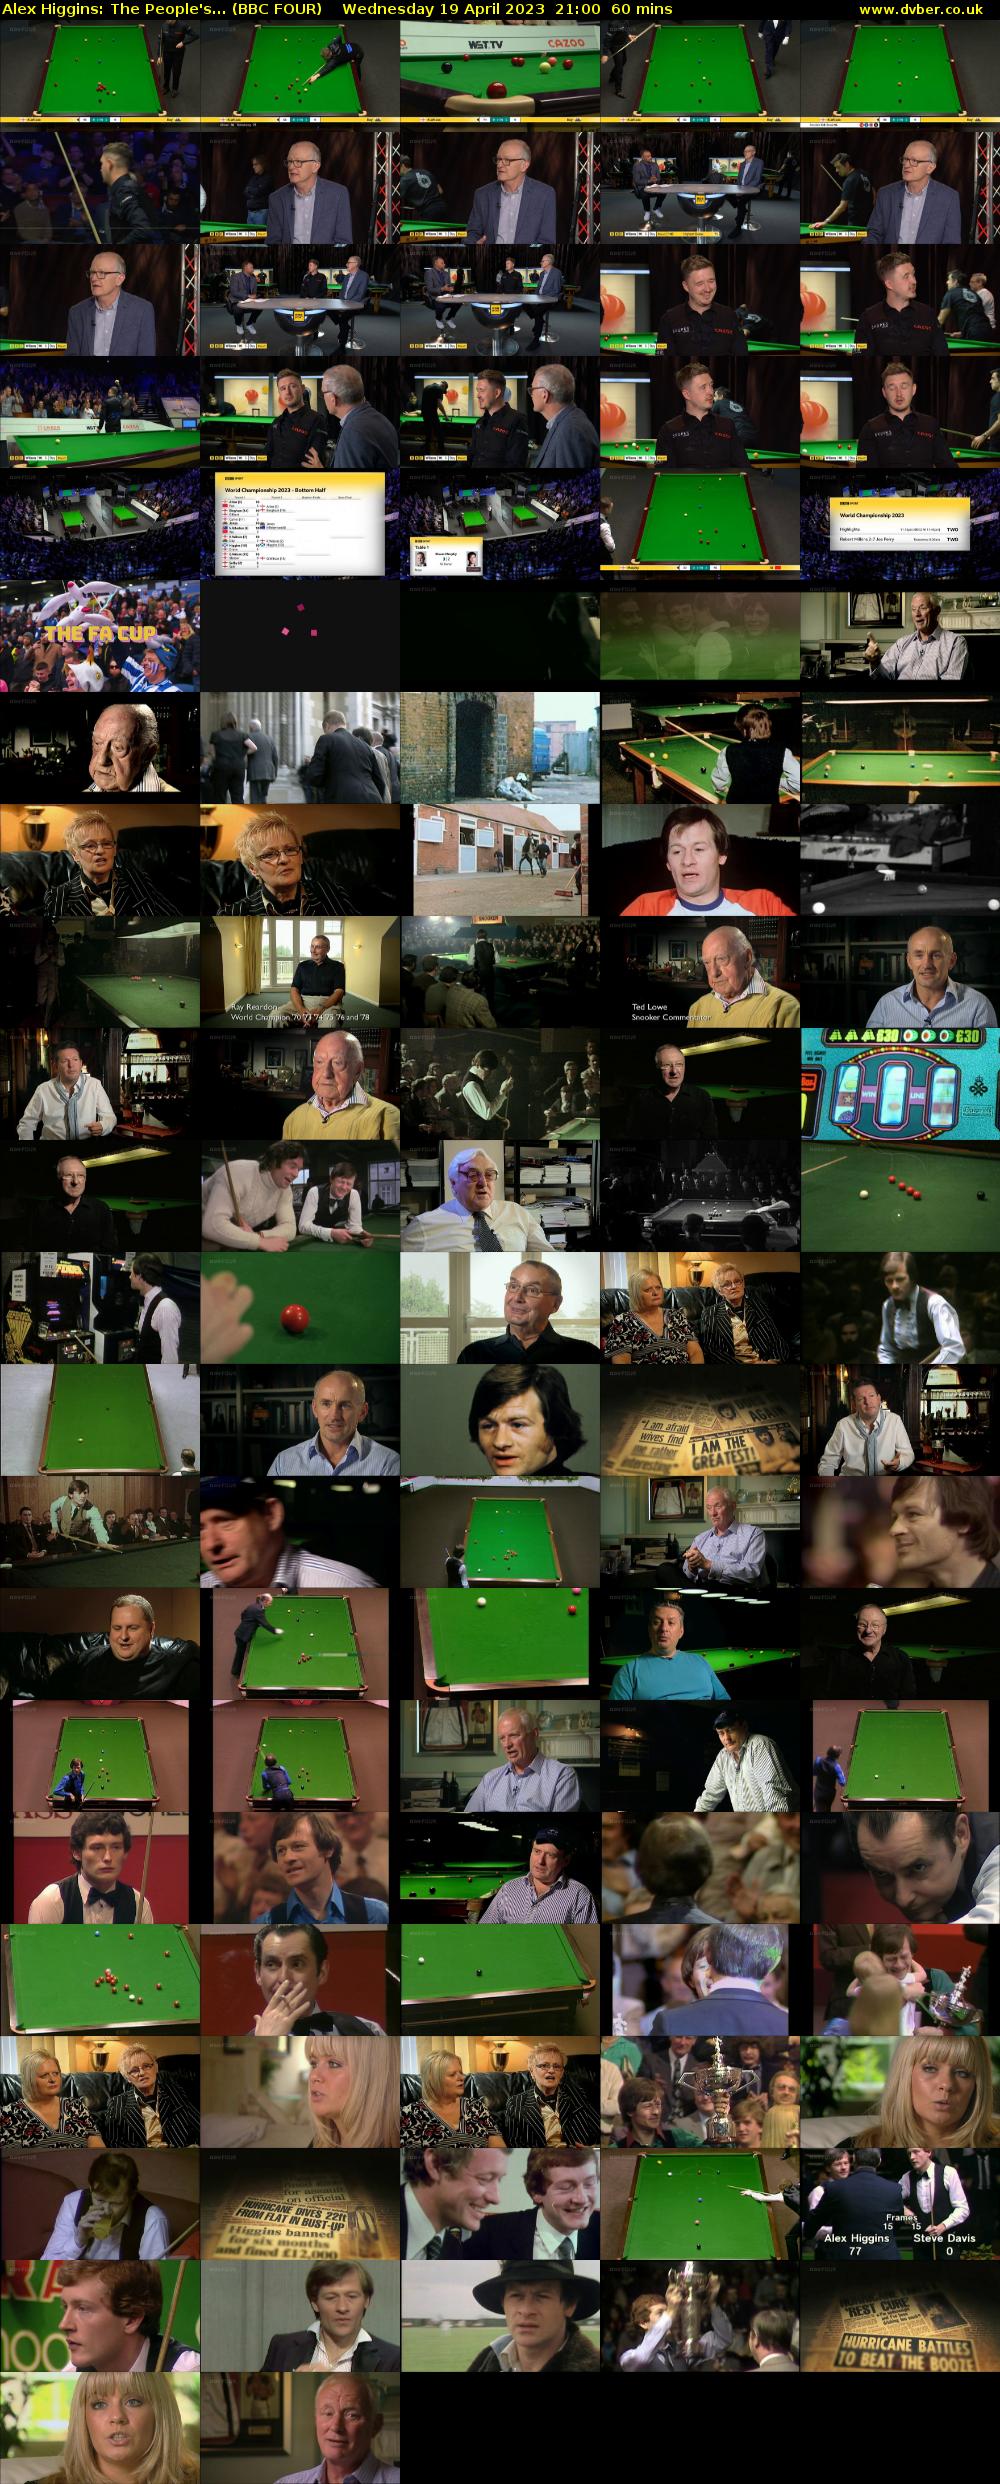 Alex Higgins: The People's... (BBC FOUR) Wednesday 19 April 2023 21:00 - 22:00